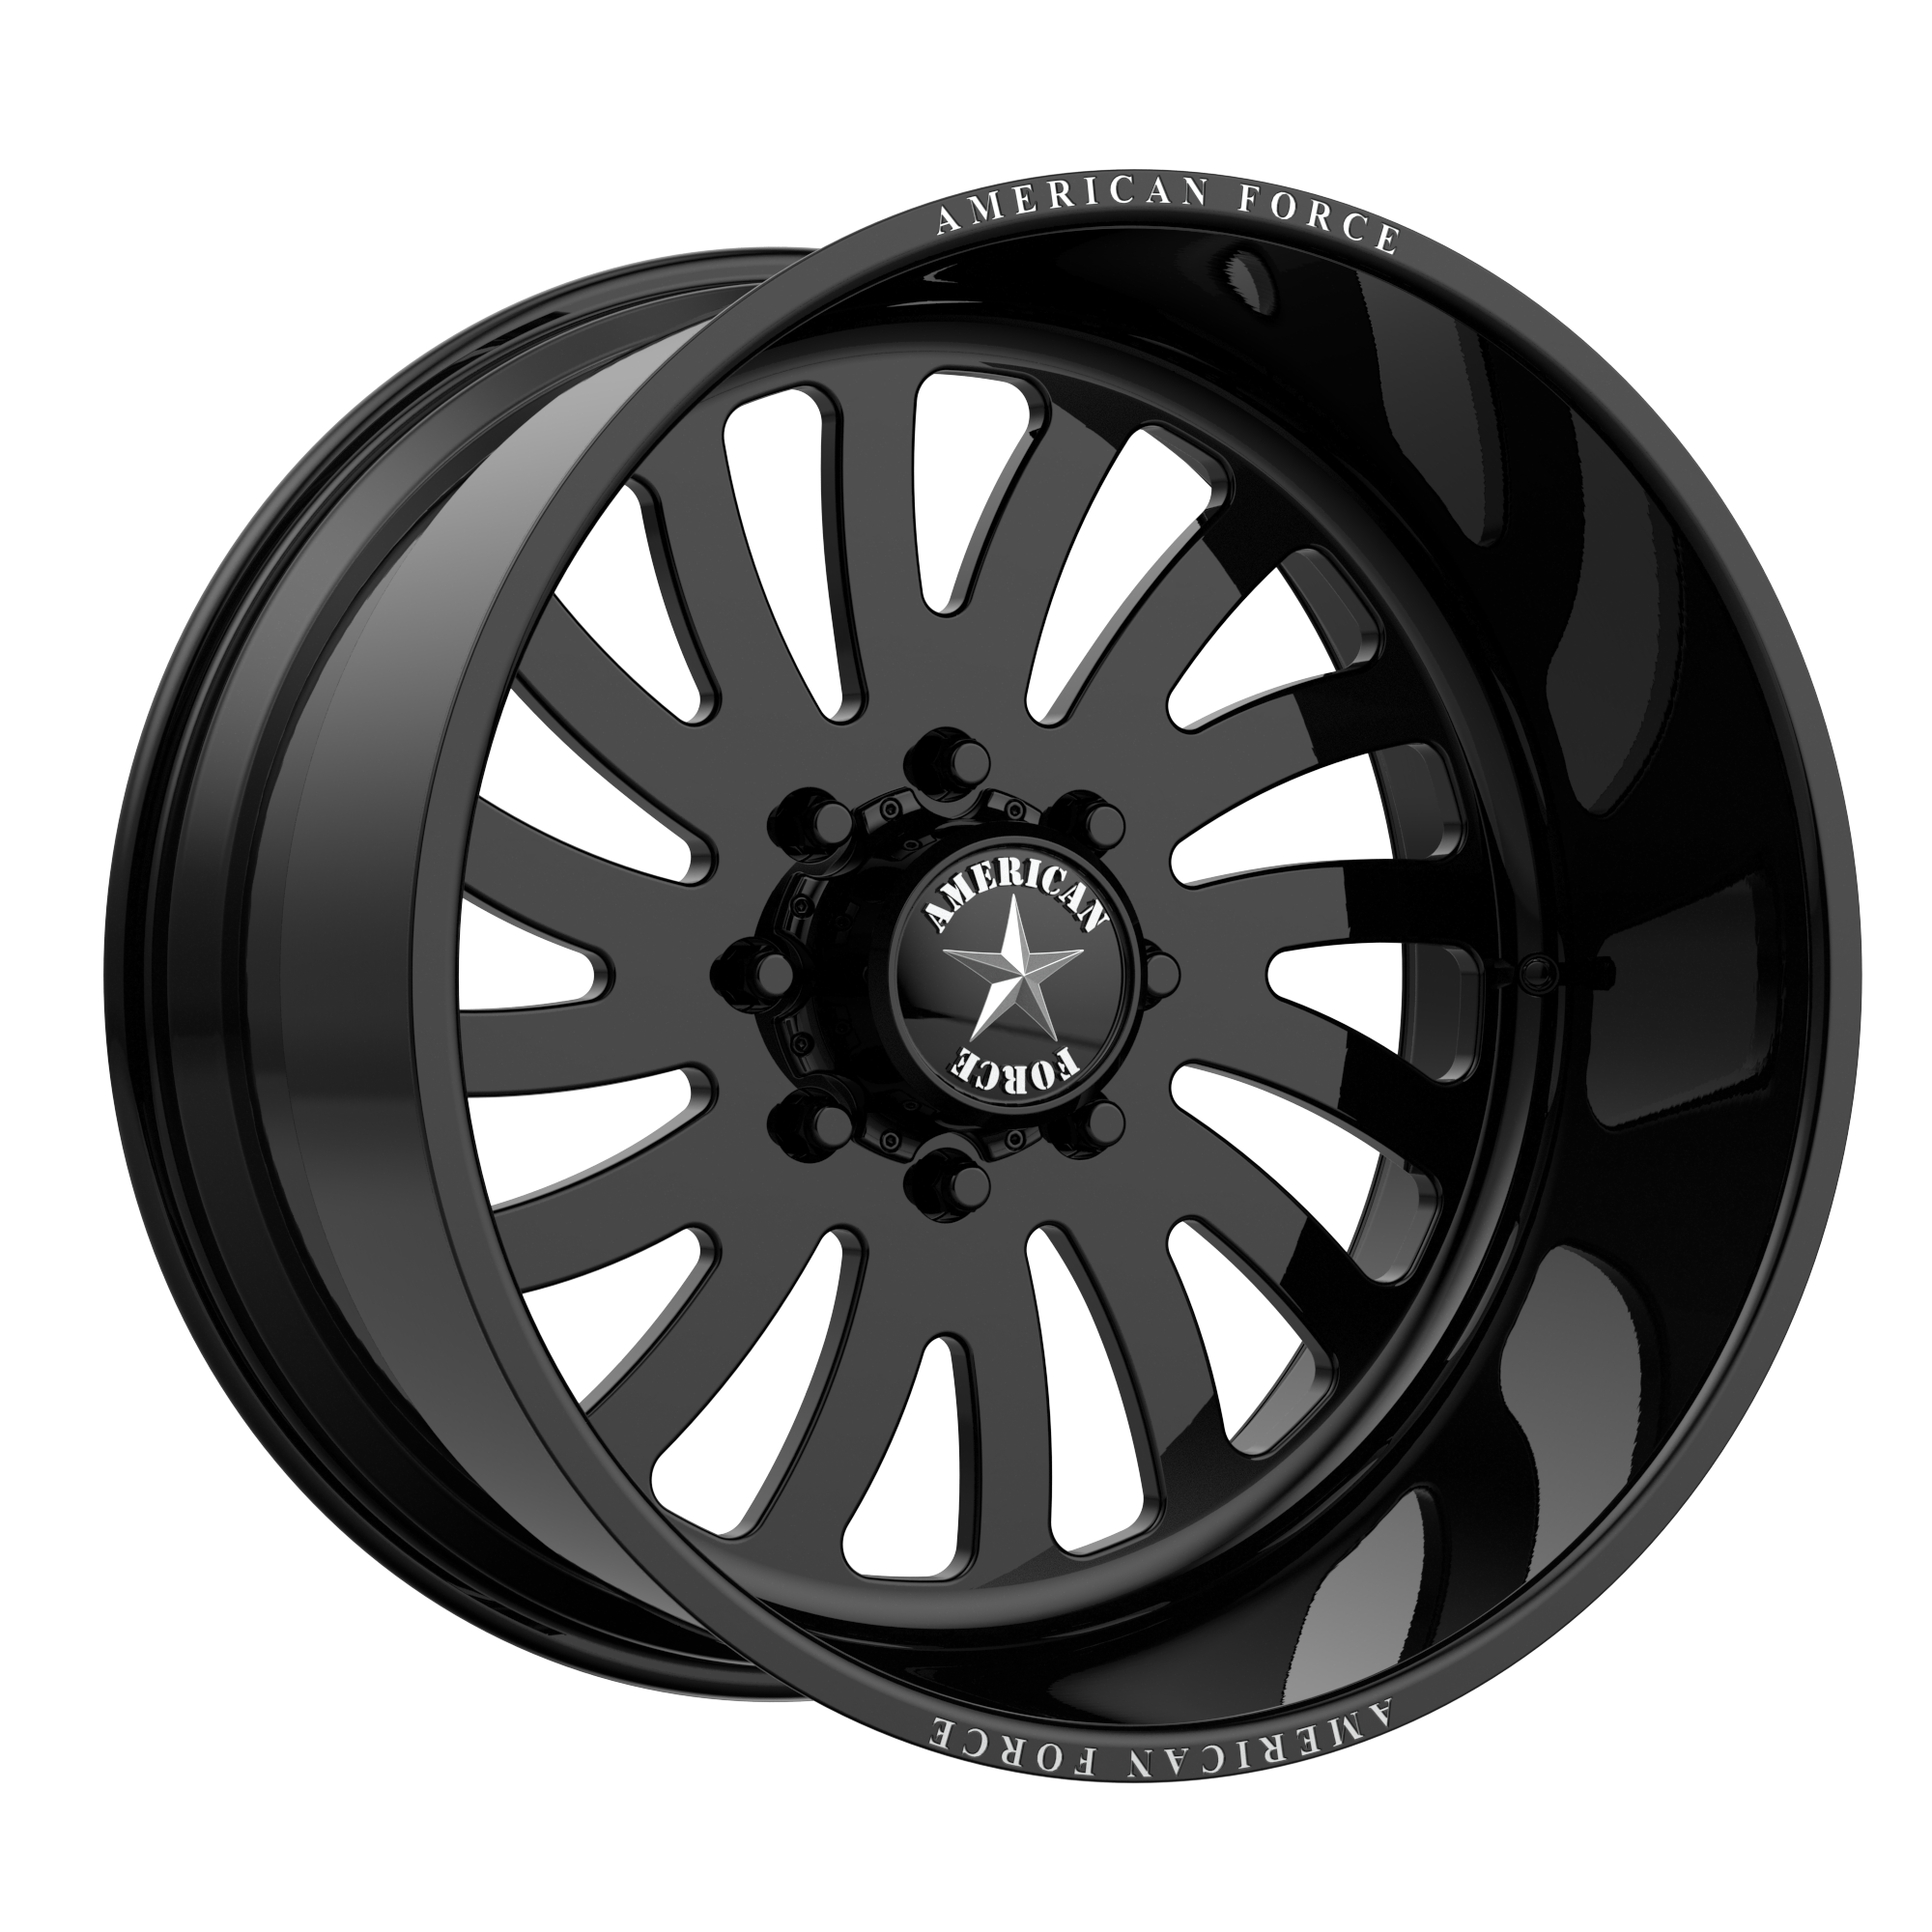 OCTANE SS 20x14 6x135.00 GLOSS BLACK MACHINED (-73 mm) - Tires and Engine Performance